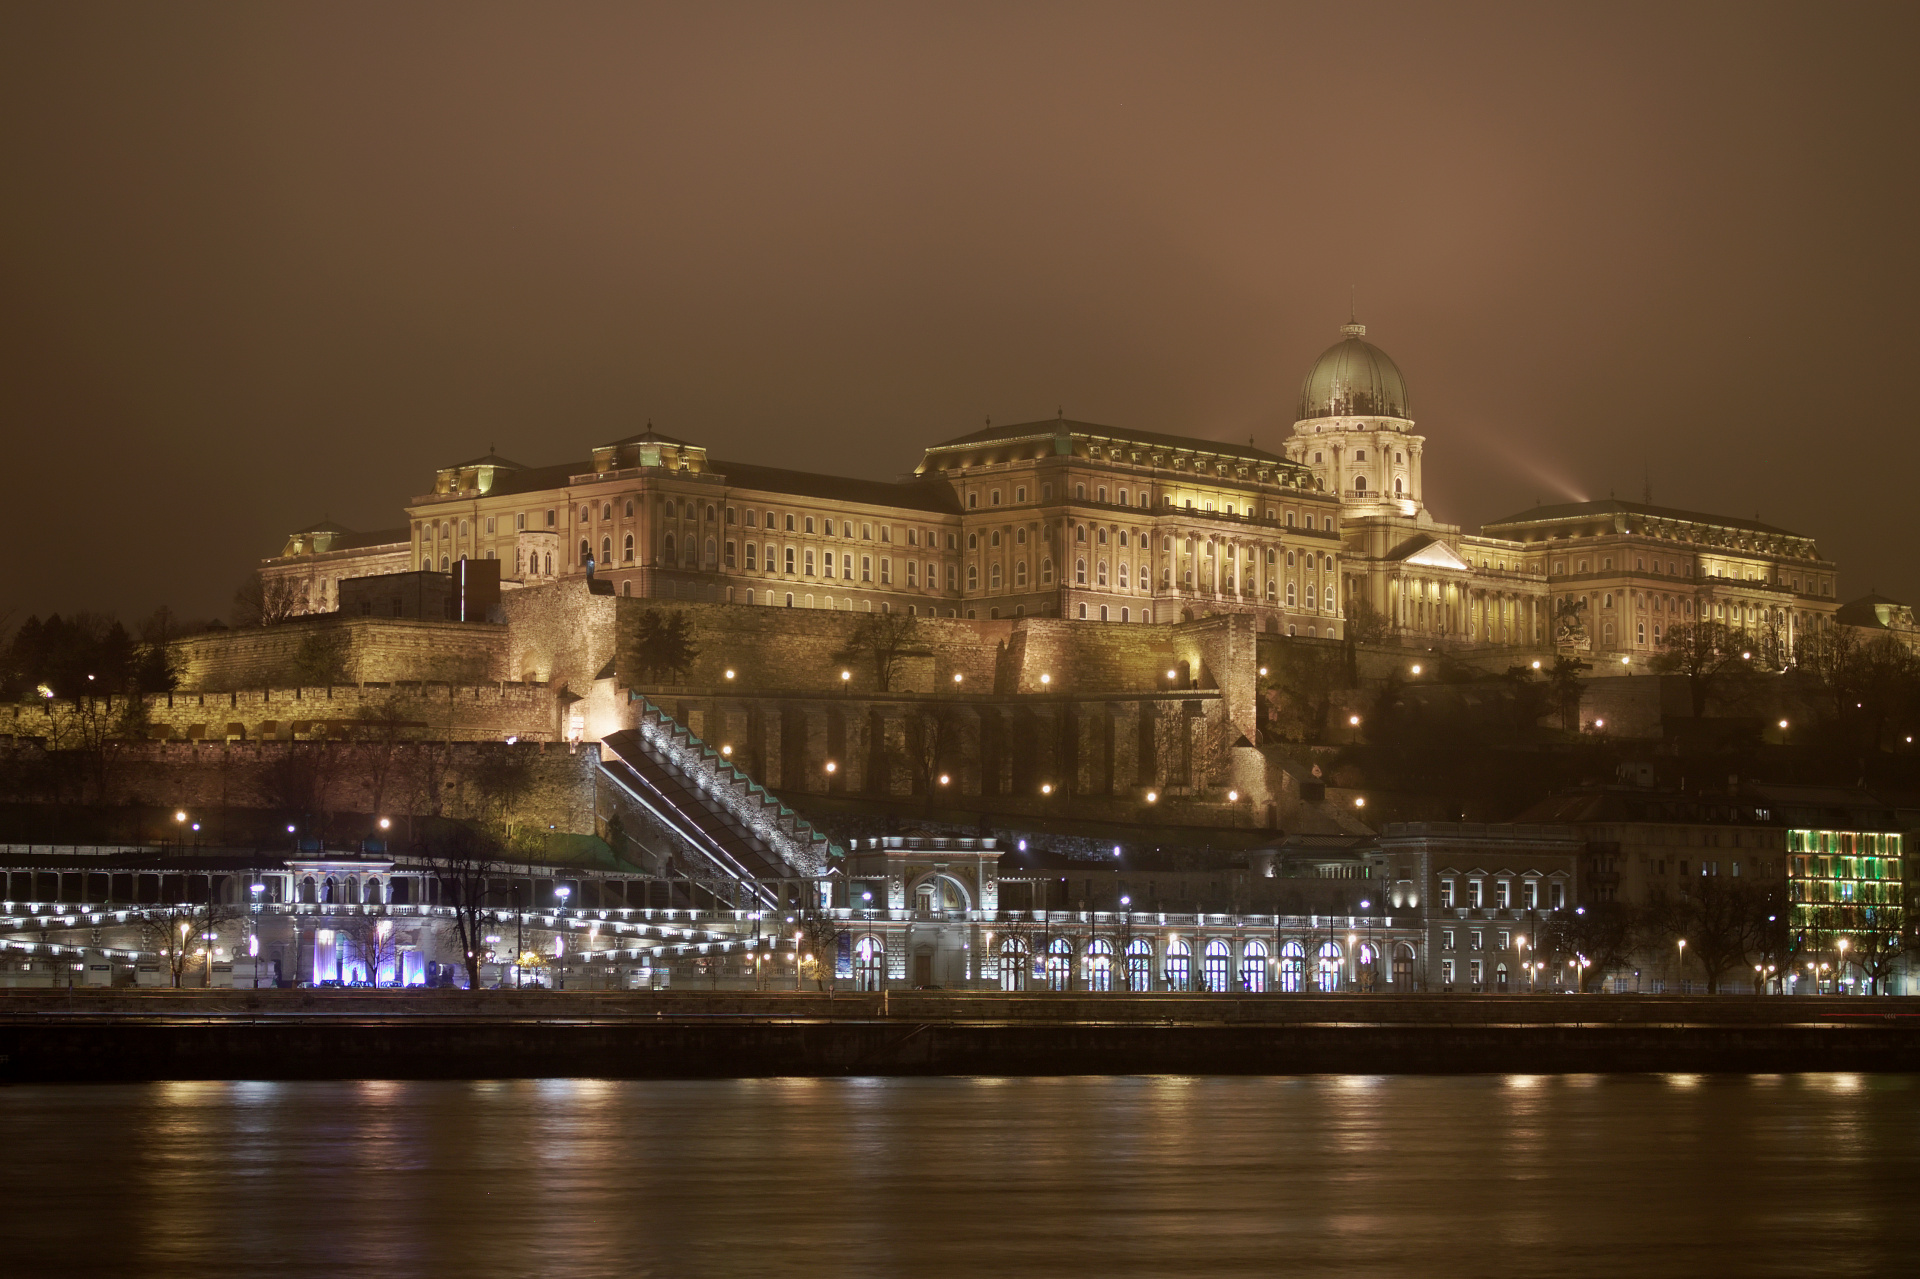 Castle Hill and Buda Castle (Travels » Budapest » Budapest at Night)